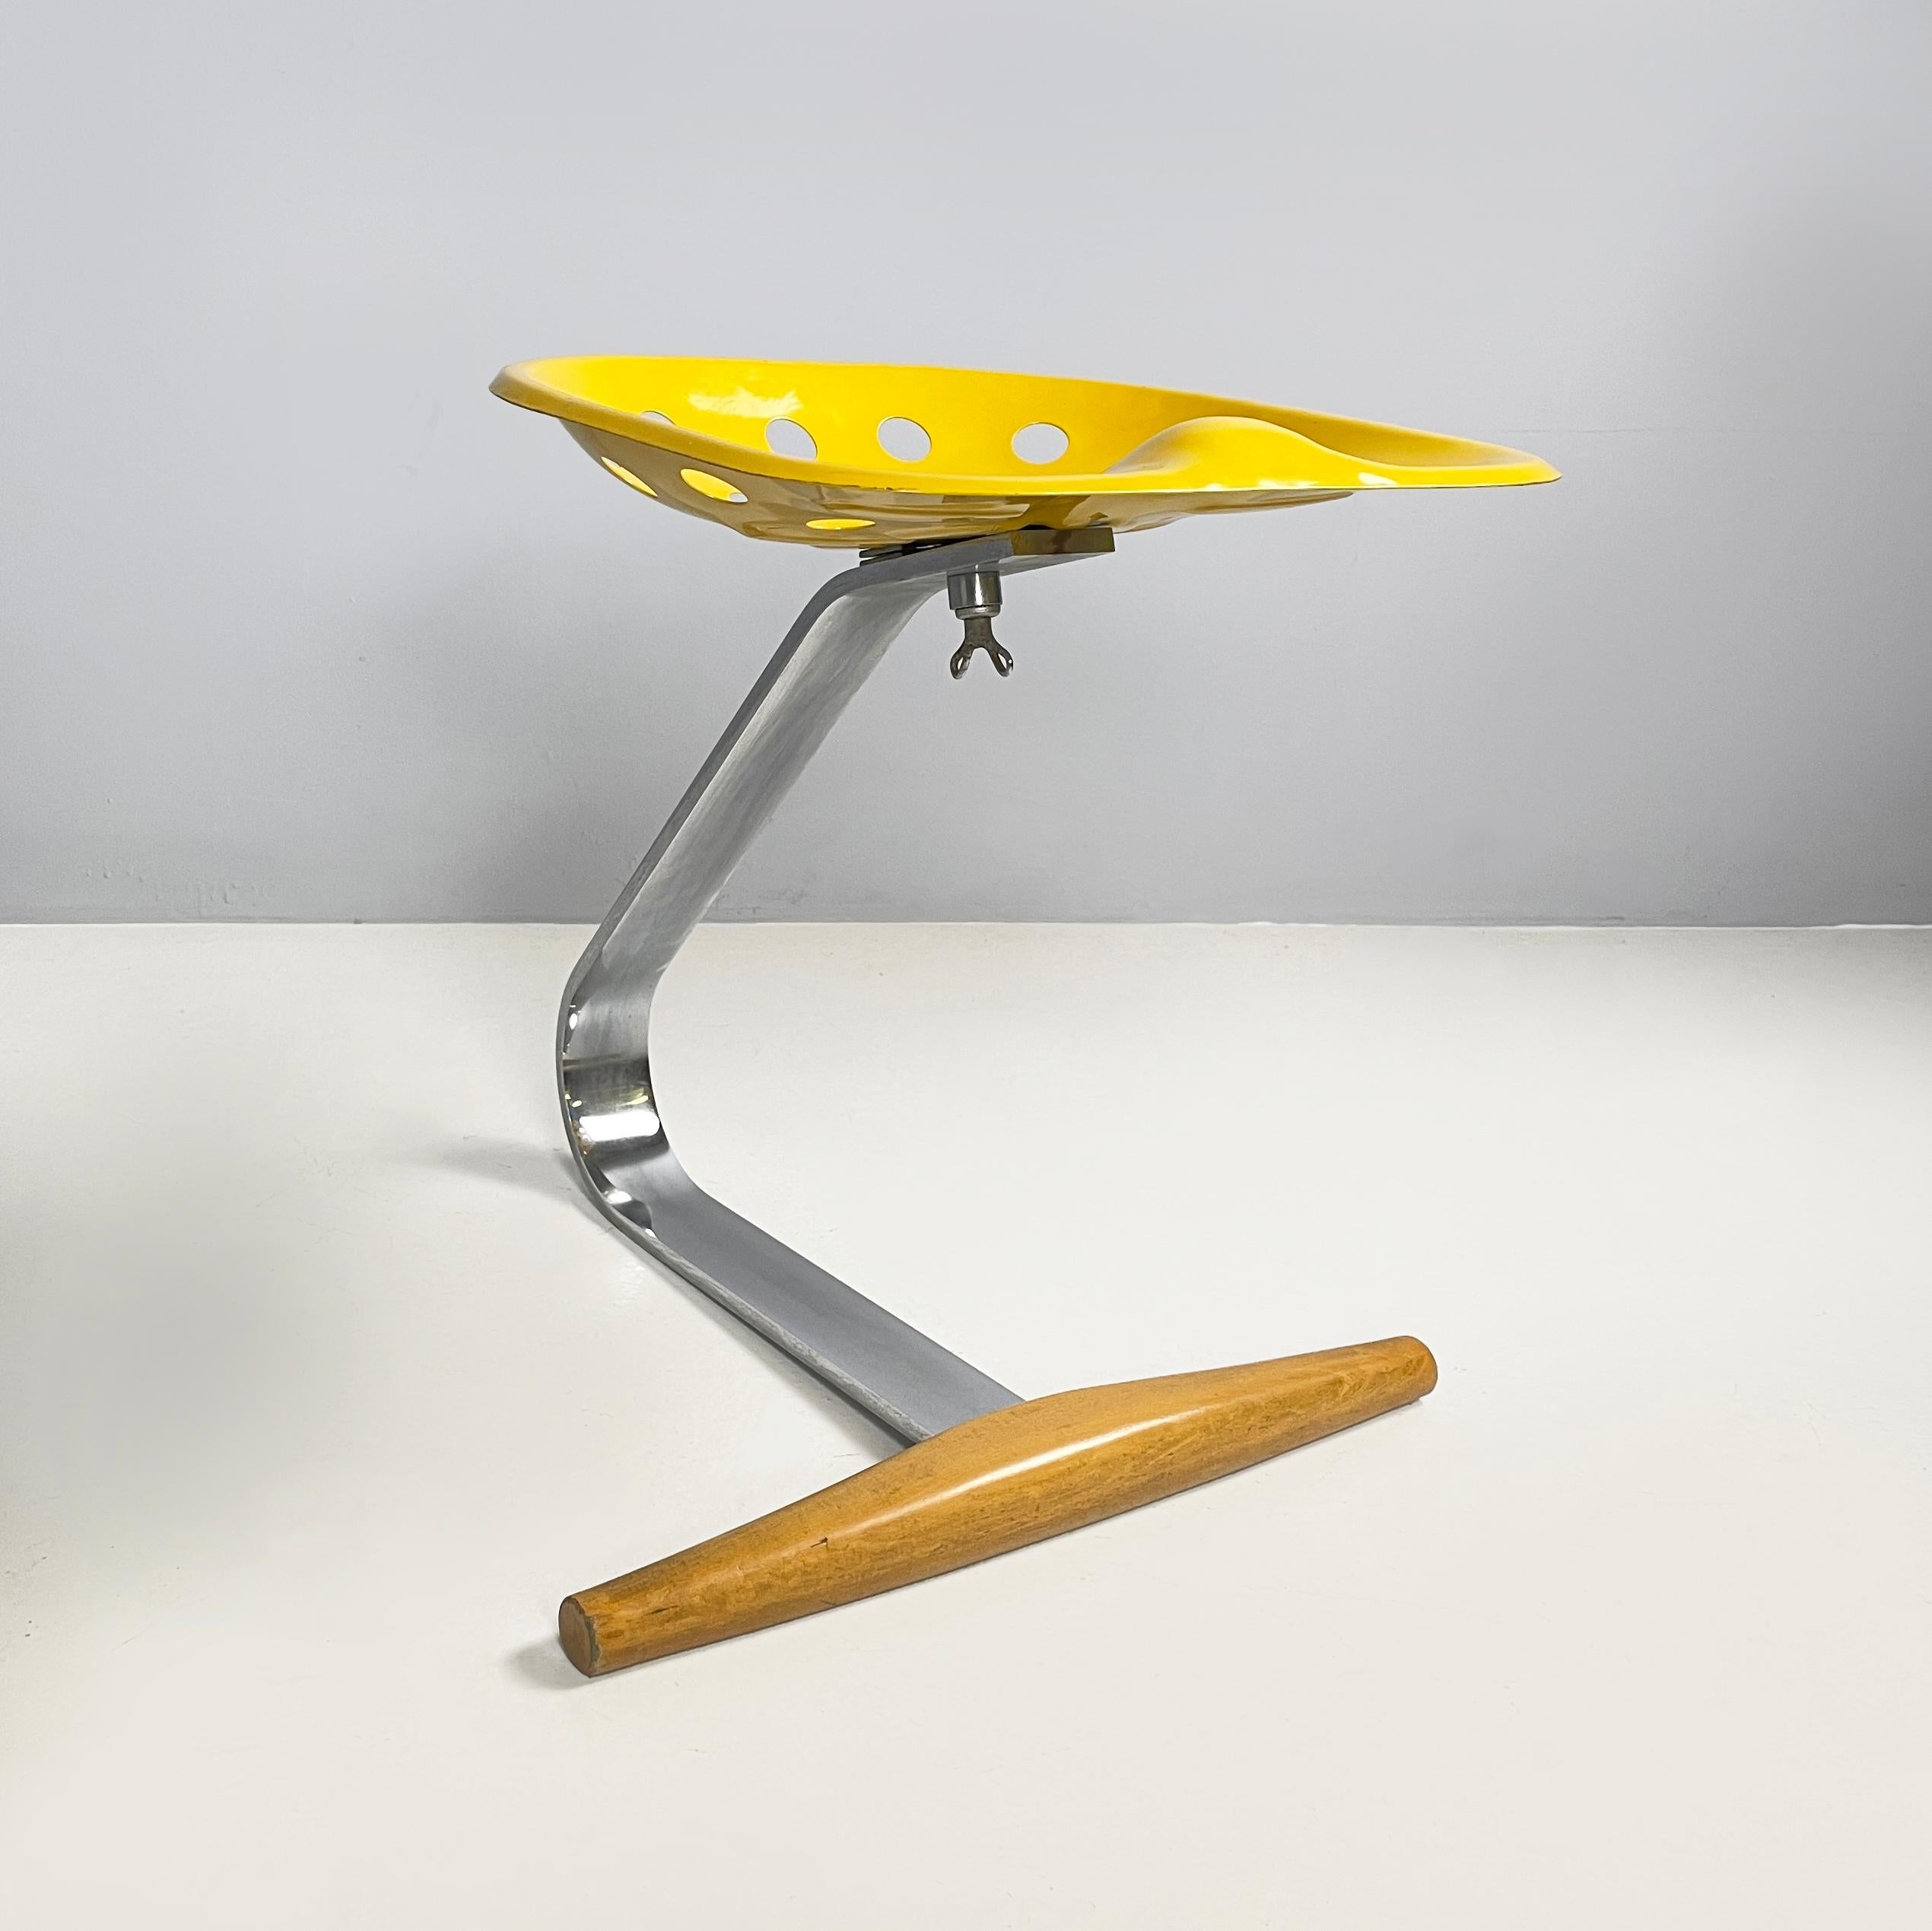 Italian mid-century modern yellow Stool Mezzadro by Achille and Piergiacomo Castiglioni for Zanotta, 1960s
Stool mod. Mezzadro with rounded, curved and perforated with round holes seat in yellow painted metal. The rectangular section structure is in